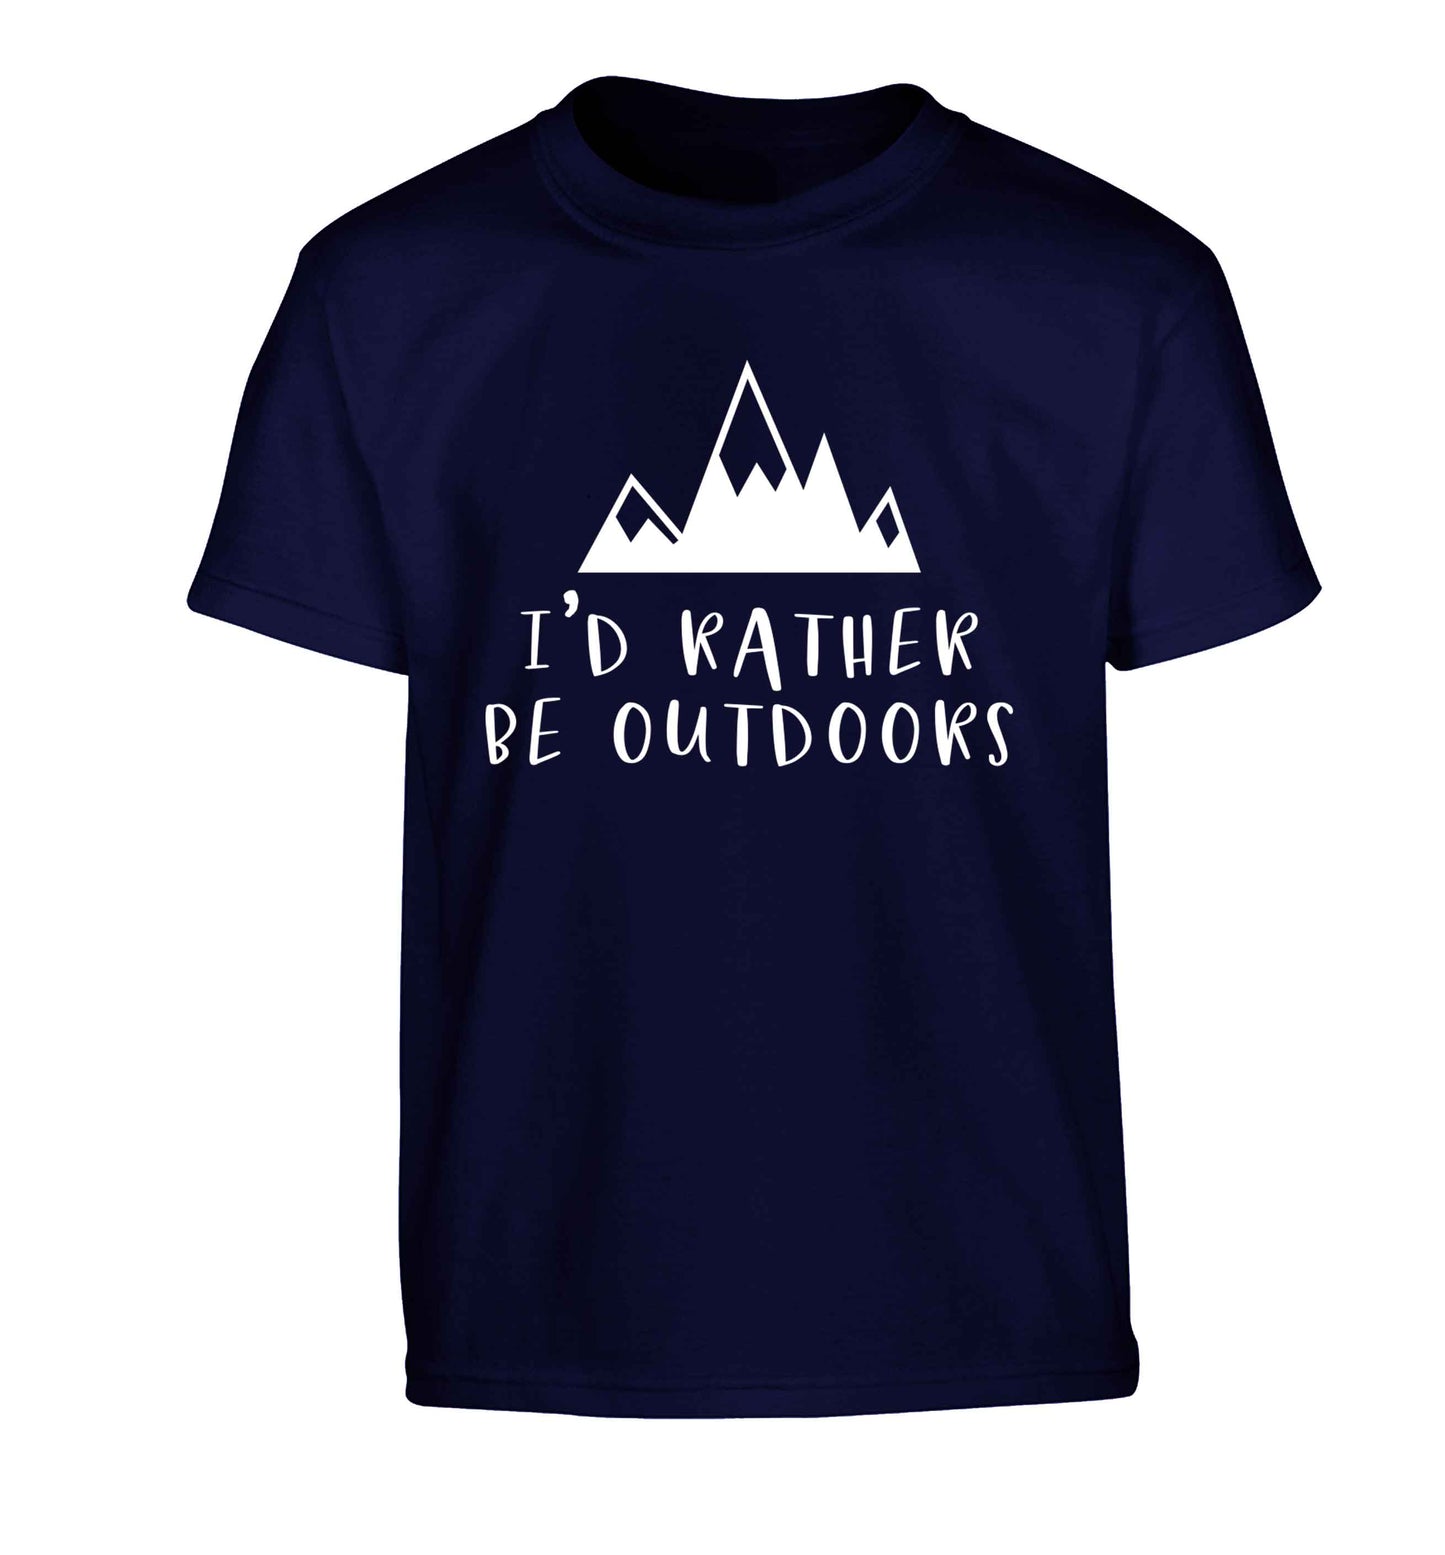 I'd rather be outdoors Children's navy Tshirt 12-13 Years